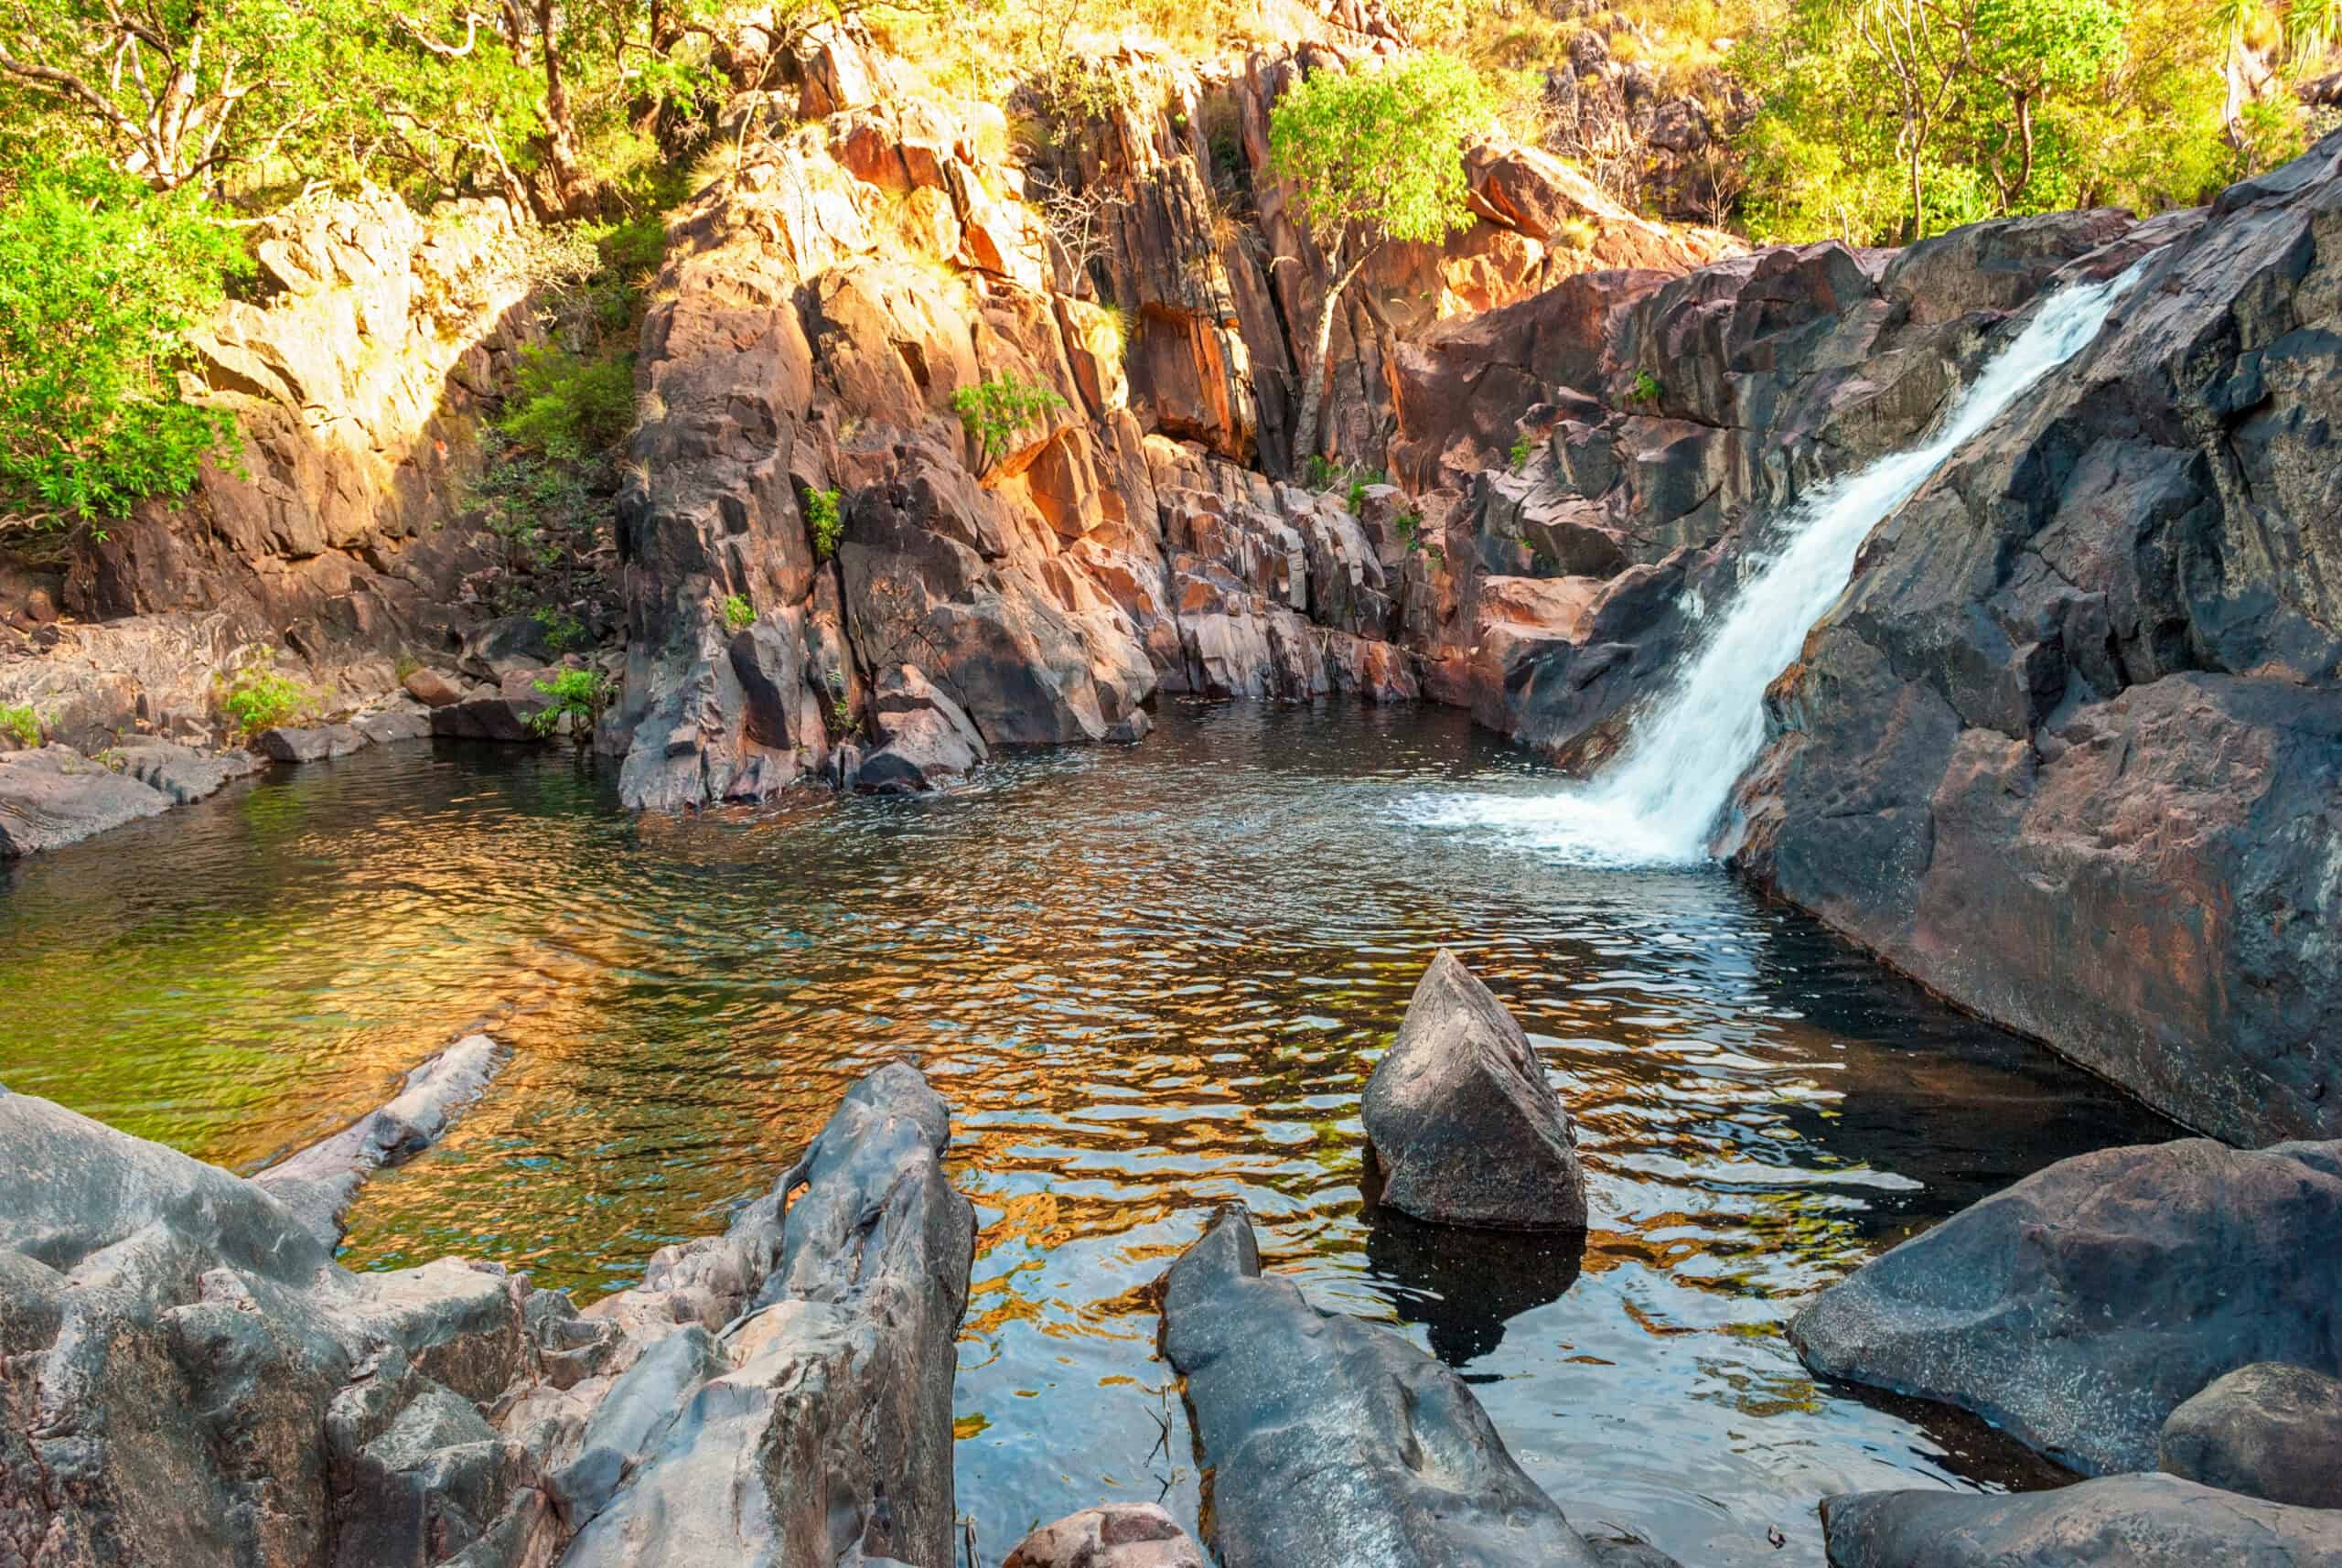 <p>Step into Kakadu National Park and other natural preserves may never quite measure up again. Spread across nearly 20,000 square kilometers in Australia’s Northern Territory, this UNESCO World Heritage site offers a dramatic array of landscapes — from ancient rock formations and cascading waterfalls to vast wetlands teeming with wildlife. </p> <p>Home to some of the world’s oldest Indigenous rock art, Kakadu not only showcases natural beauty but deep cultural resonance, with artworks that tell stories of creation, spirituality, and survival over more than 65,000 years. Just be warned, after experiencing Kakadu’s rich tapestry of ecological and cultural treasures, less diverse and historically significant parks might seem a little lackluster.</p>